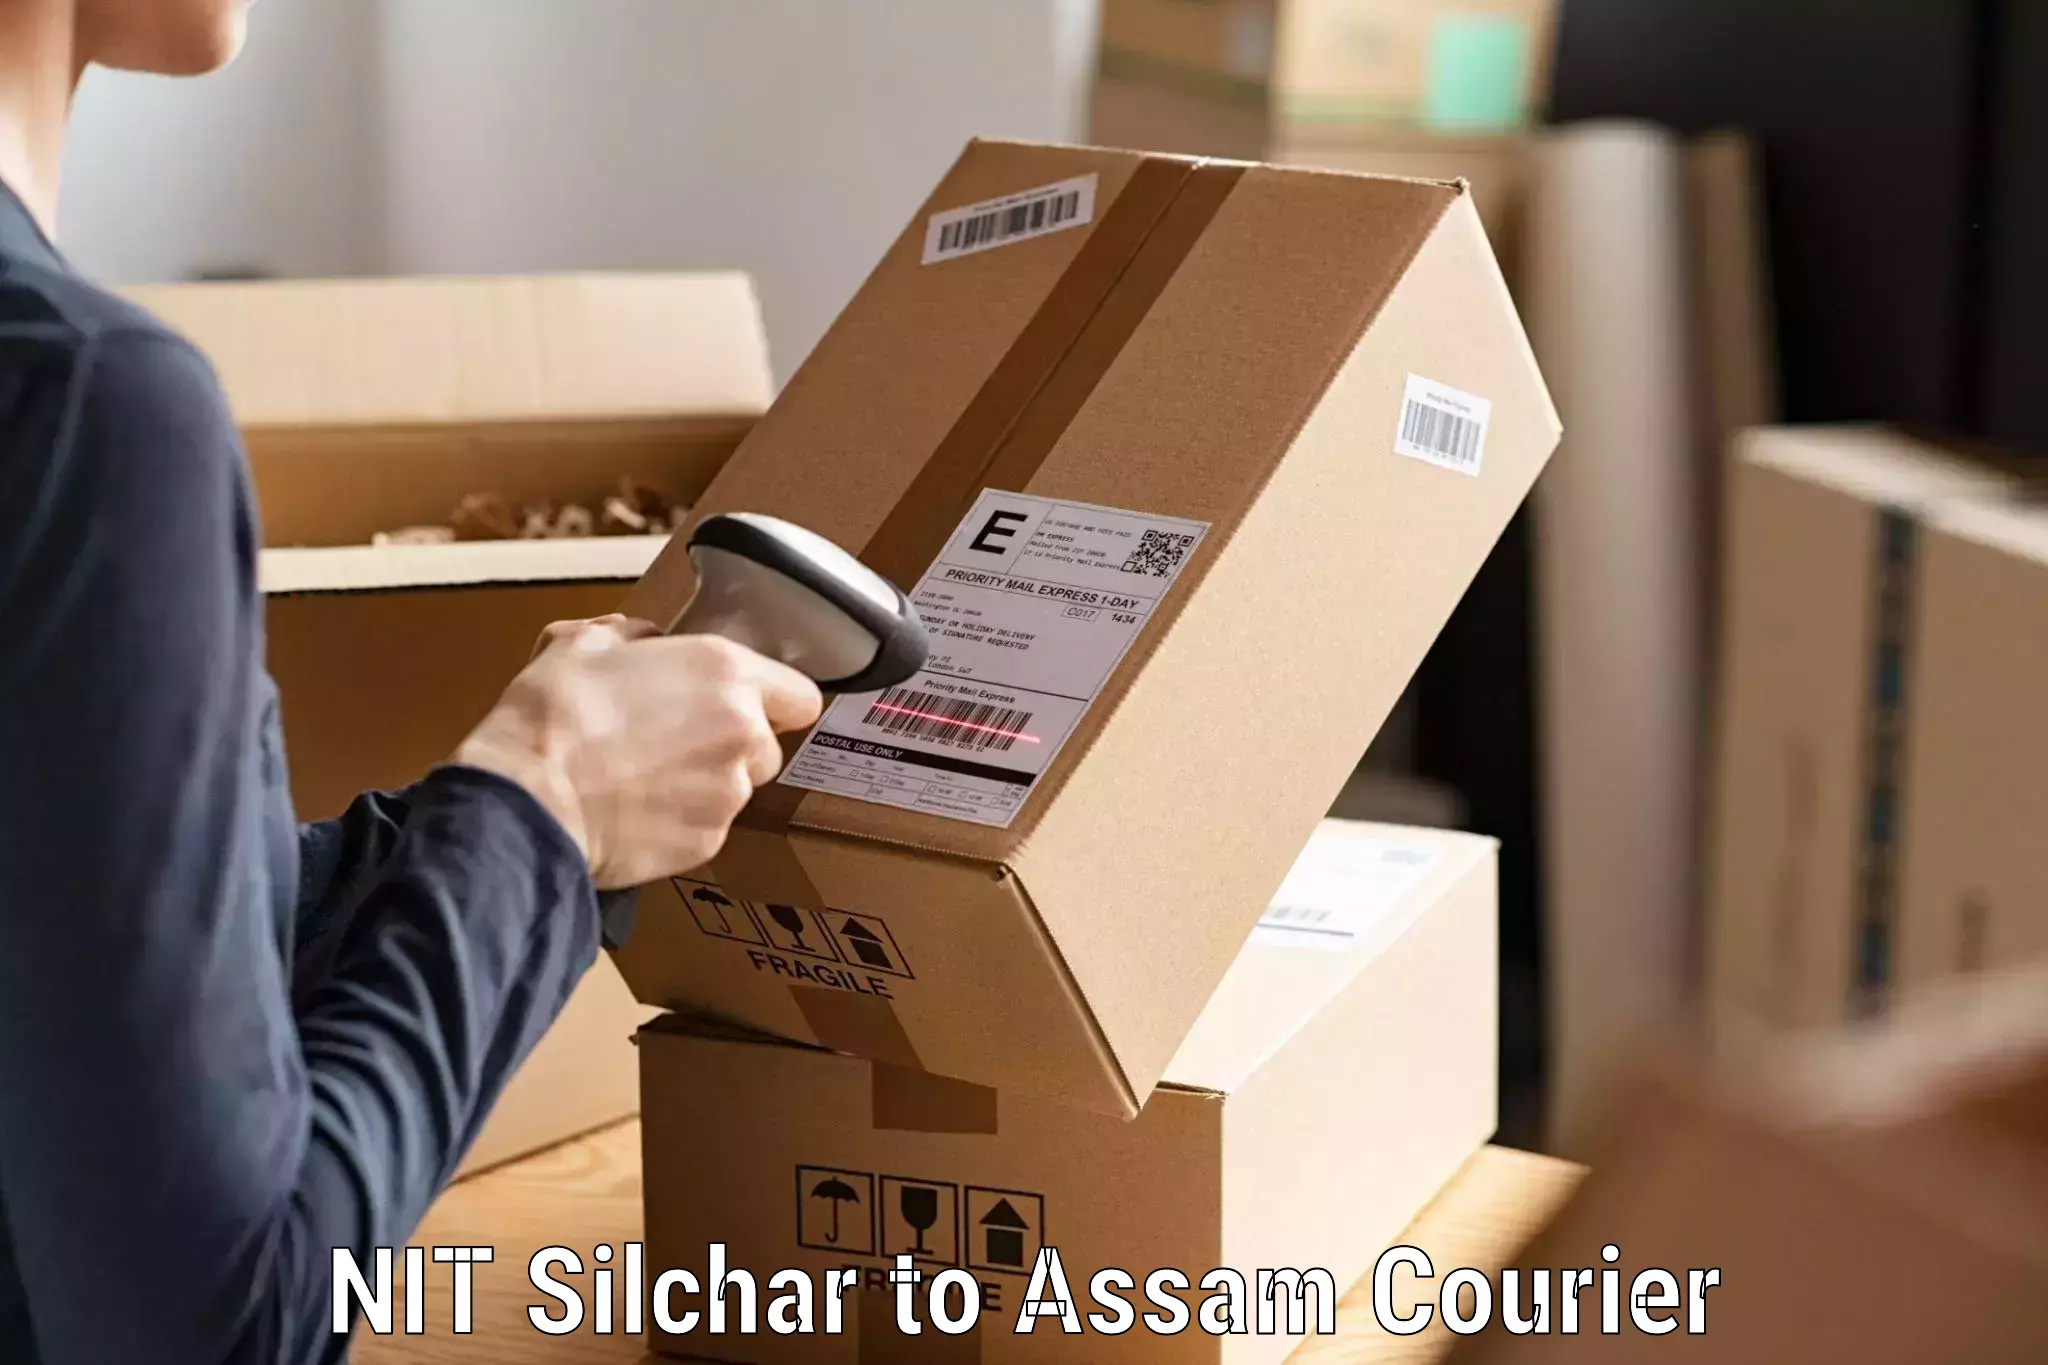 Punctual parcel services NIT Silchar to Hojai Lanka